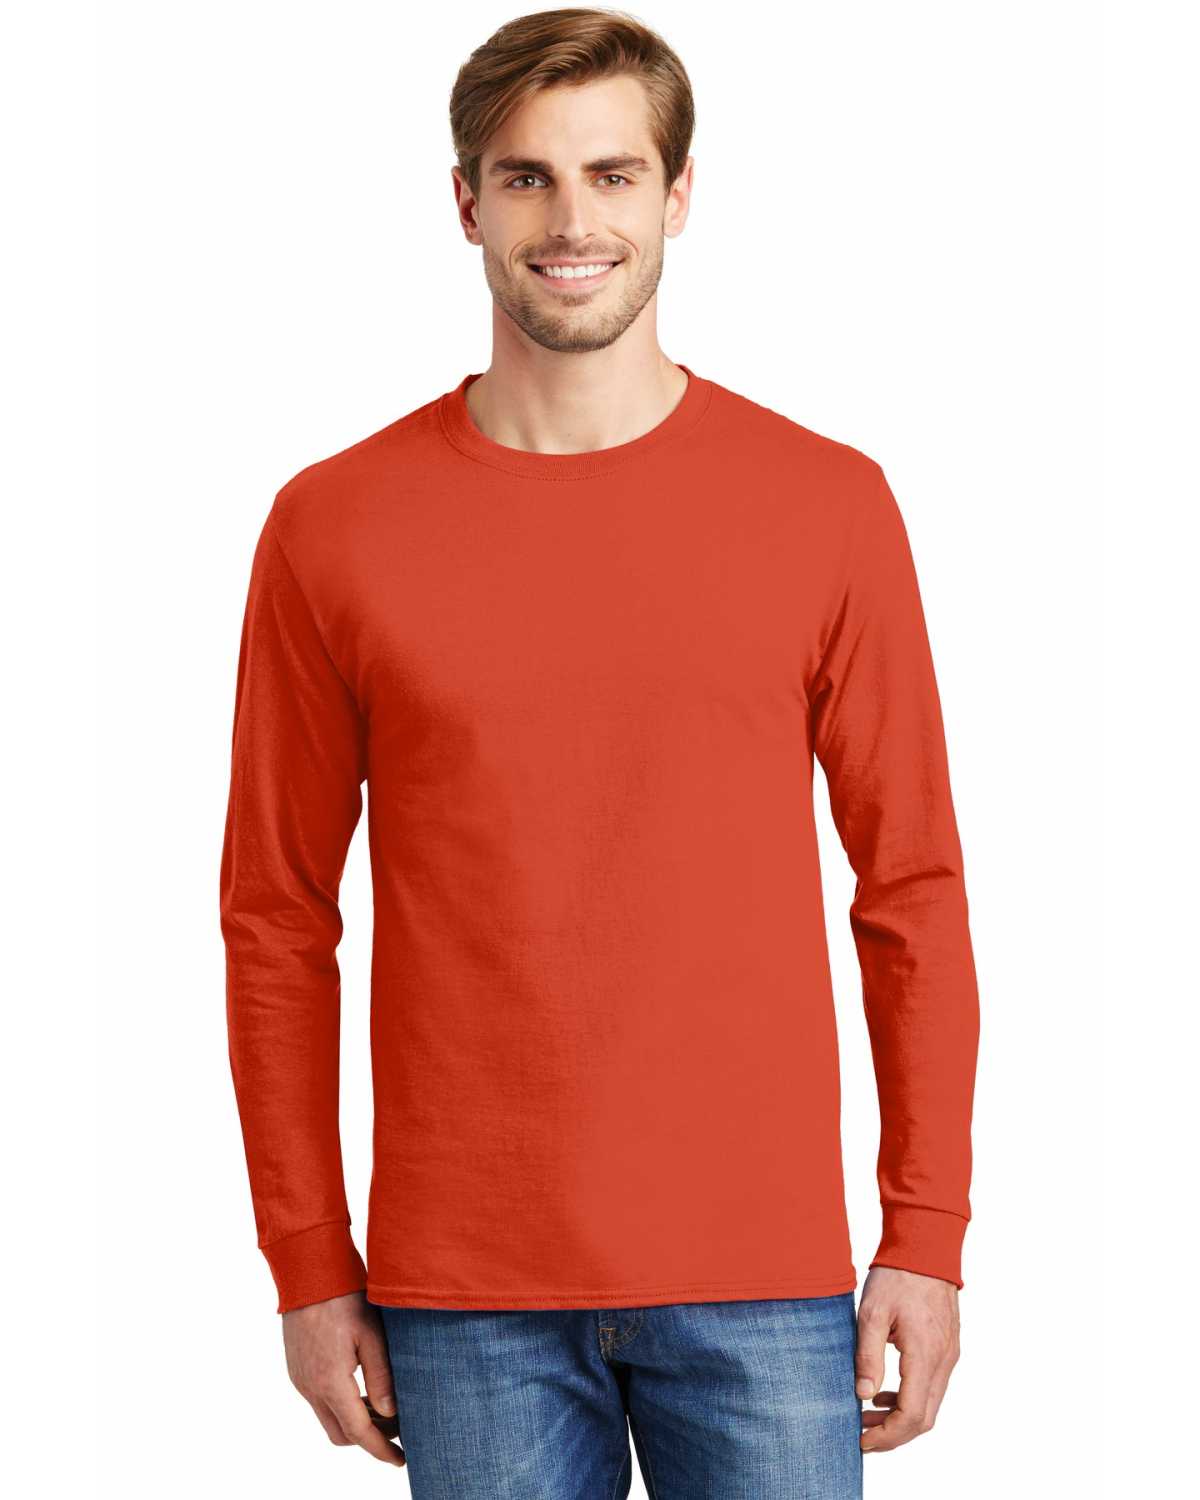 Hanes 5586 Tagless 100% Cotton Long Sleeve T-Shirt on discount ...